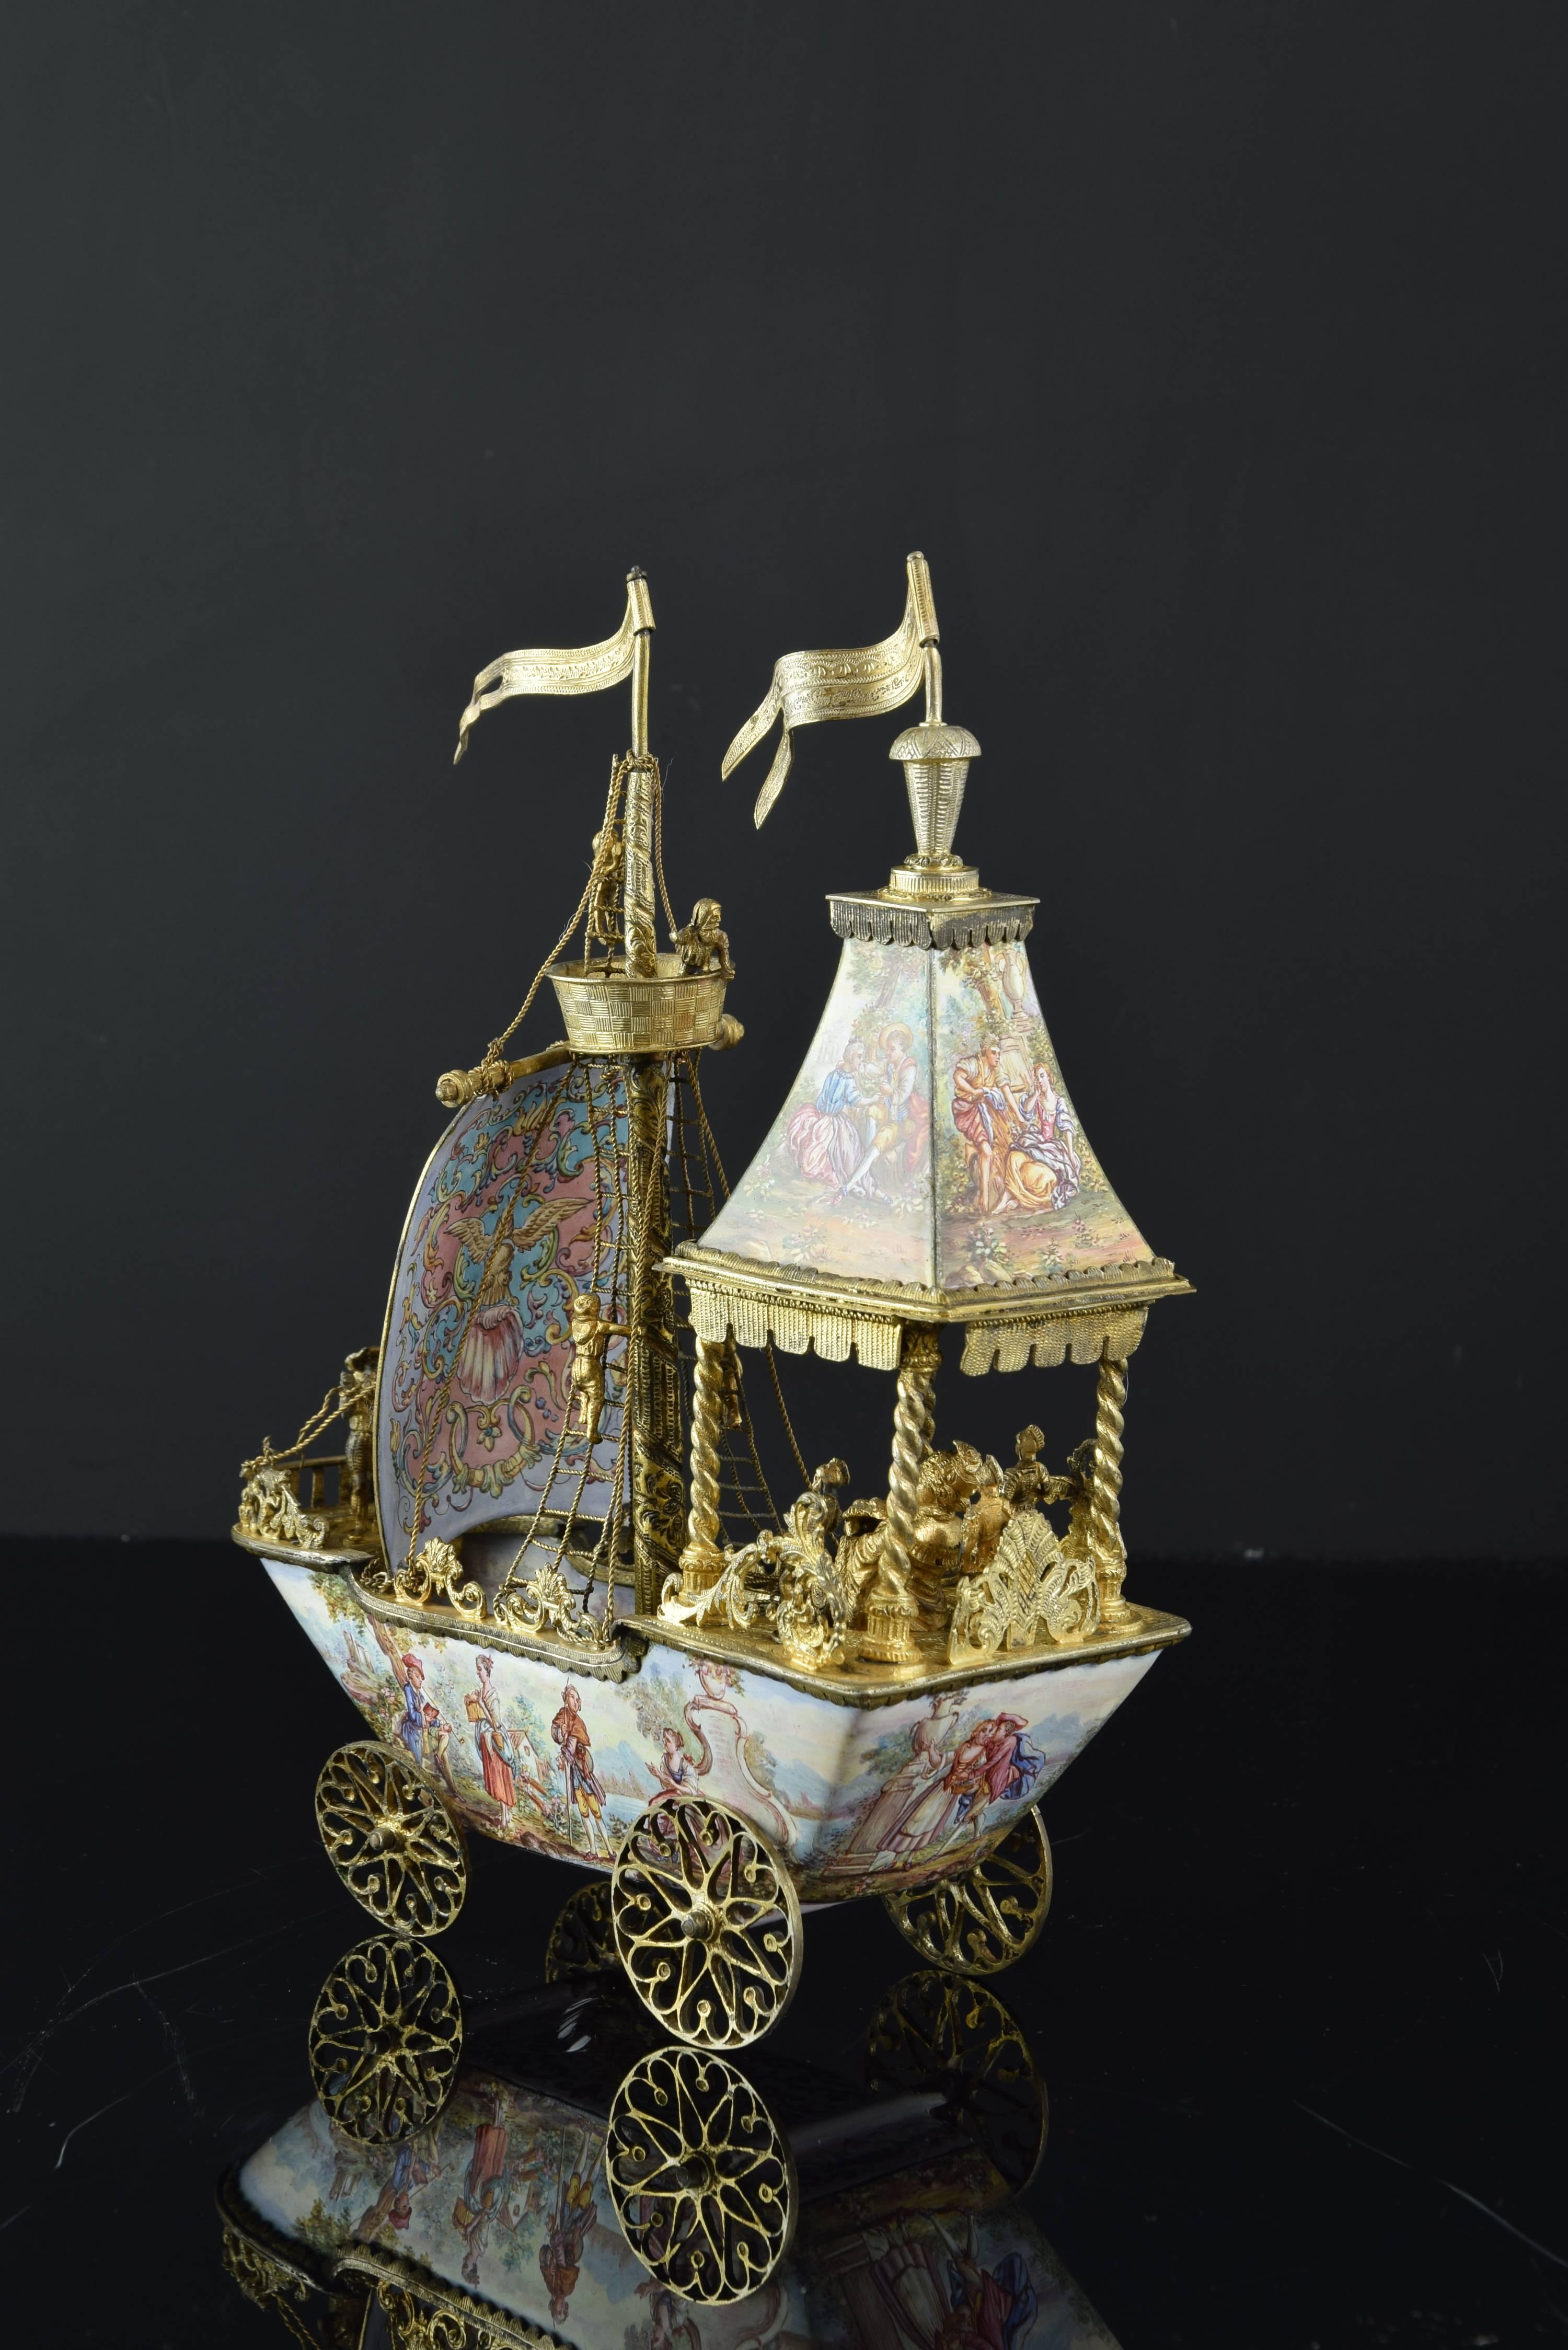 Viennese enameled centerpiece. Gilt silver and enamel. 19th century.
The four wheels that raise it present / display shafted axes, worked with simplified vegetal forms that interbreed. These, the railing of the deck, the rigging of rope, the mast,